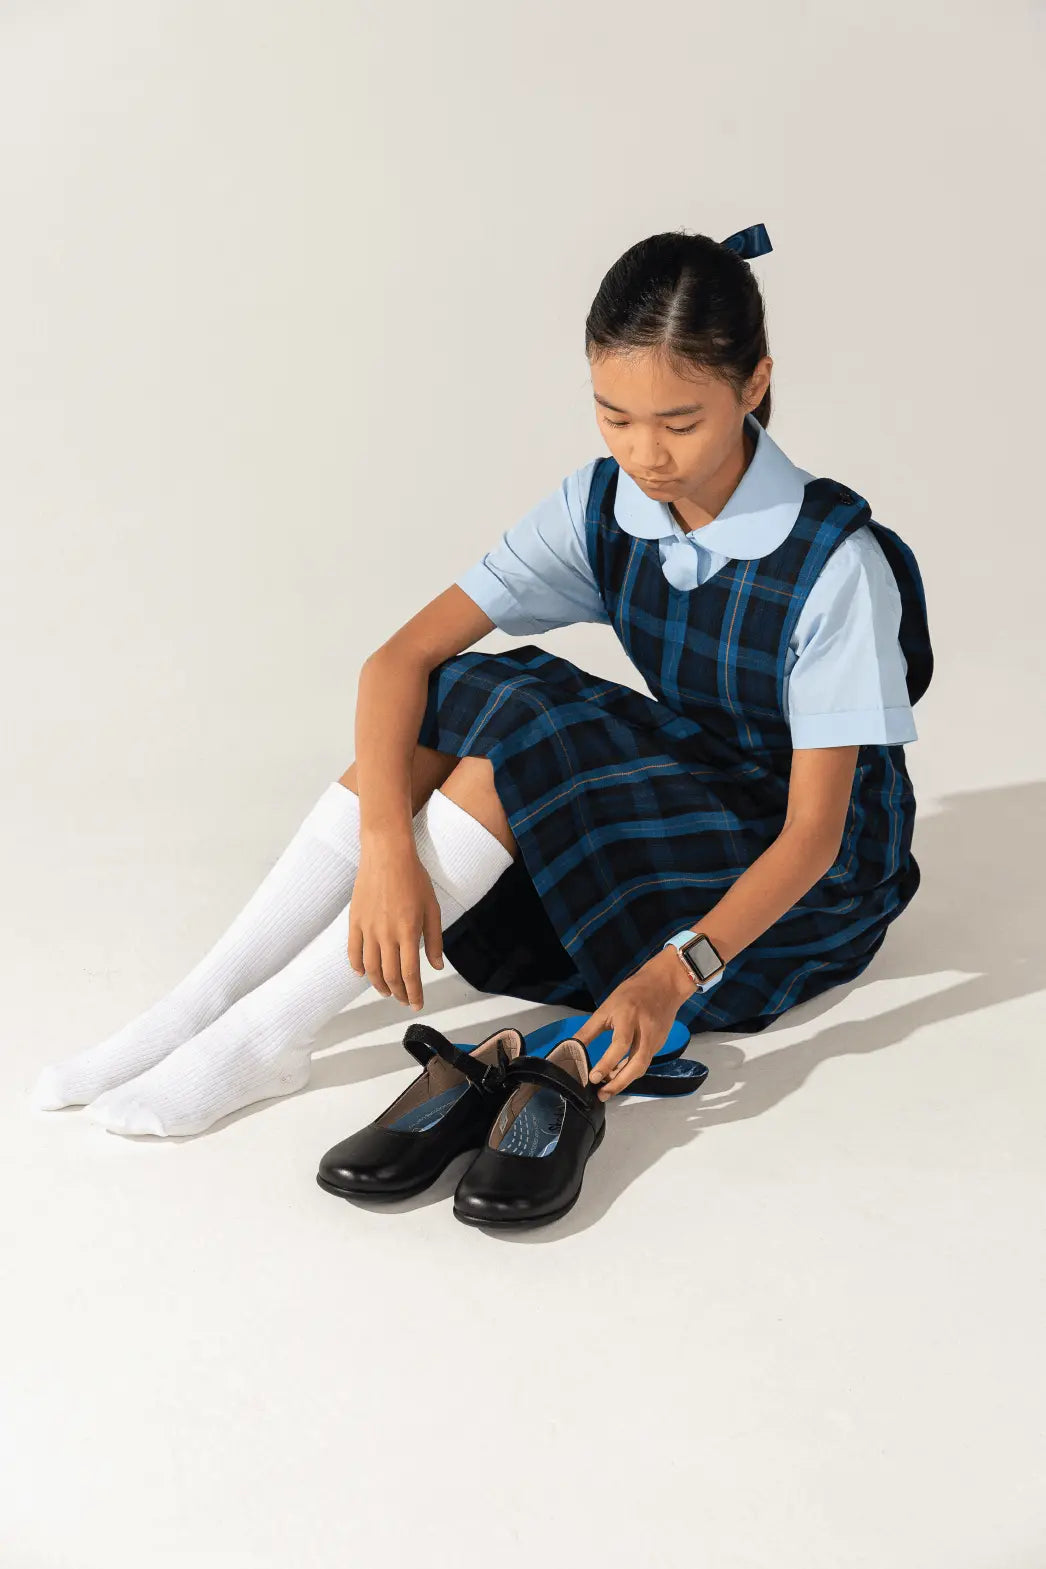 school girl sitting and putting on shoes